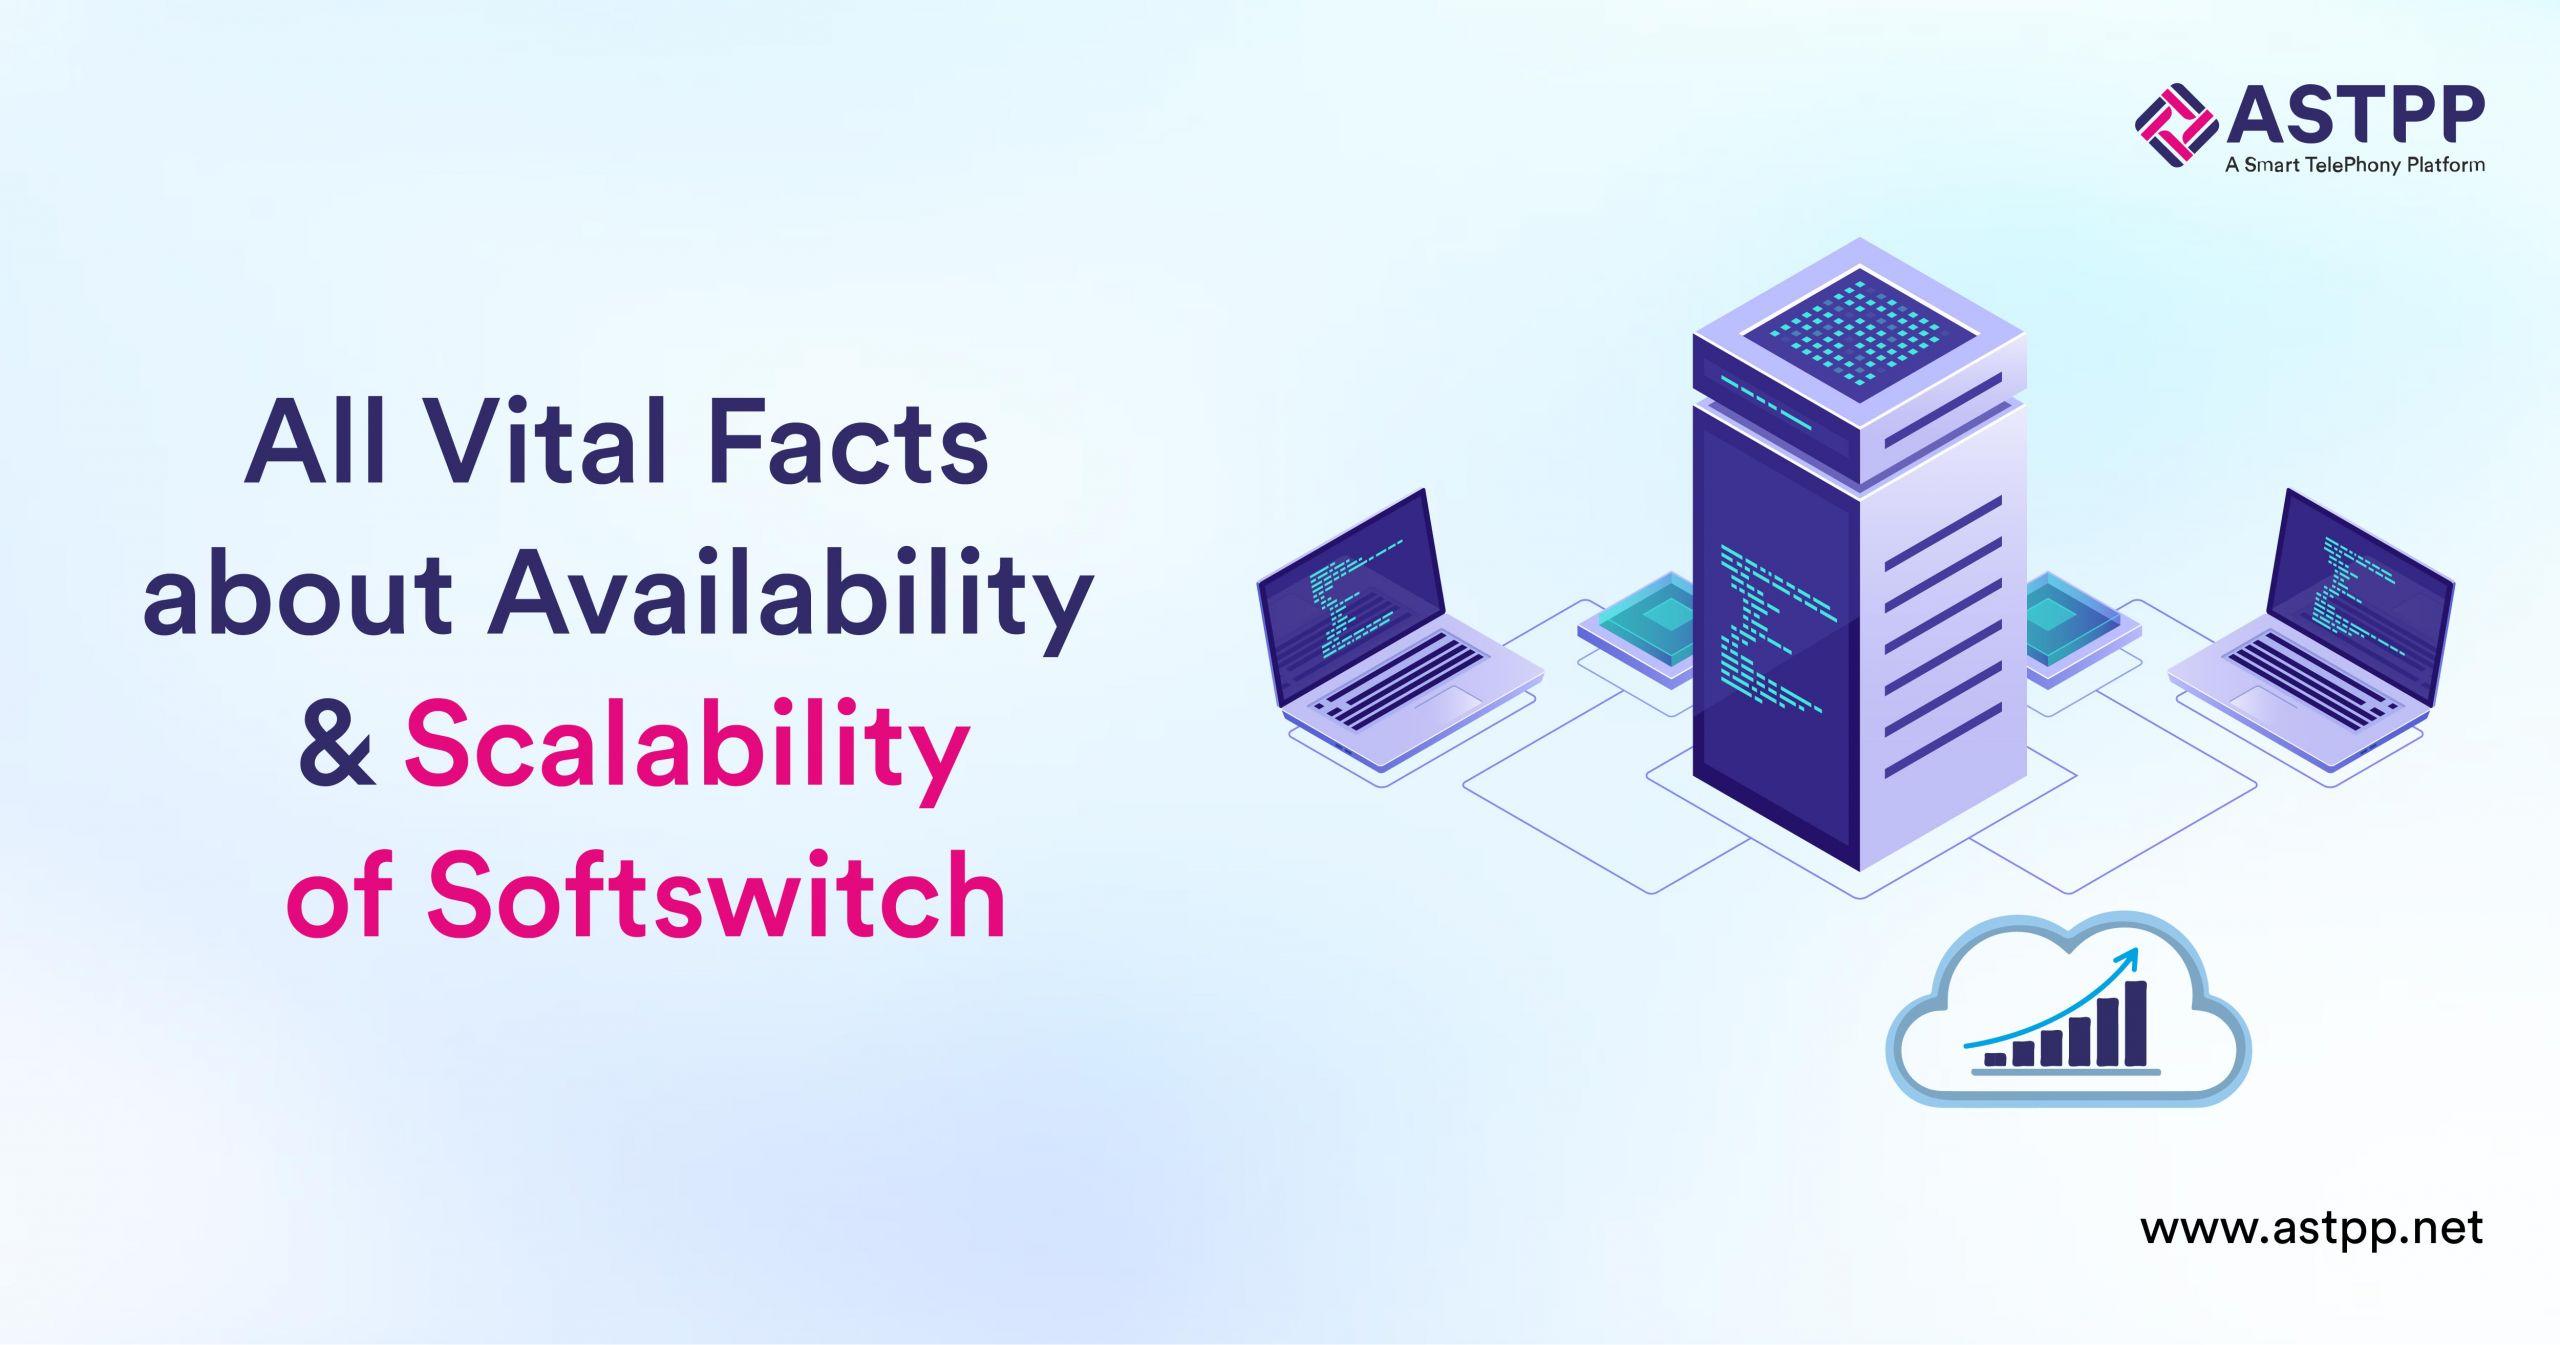 Softswitch High Availability and Scalability: All Vital Facts